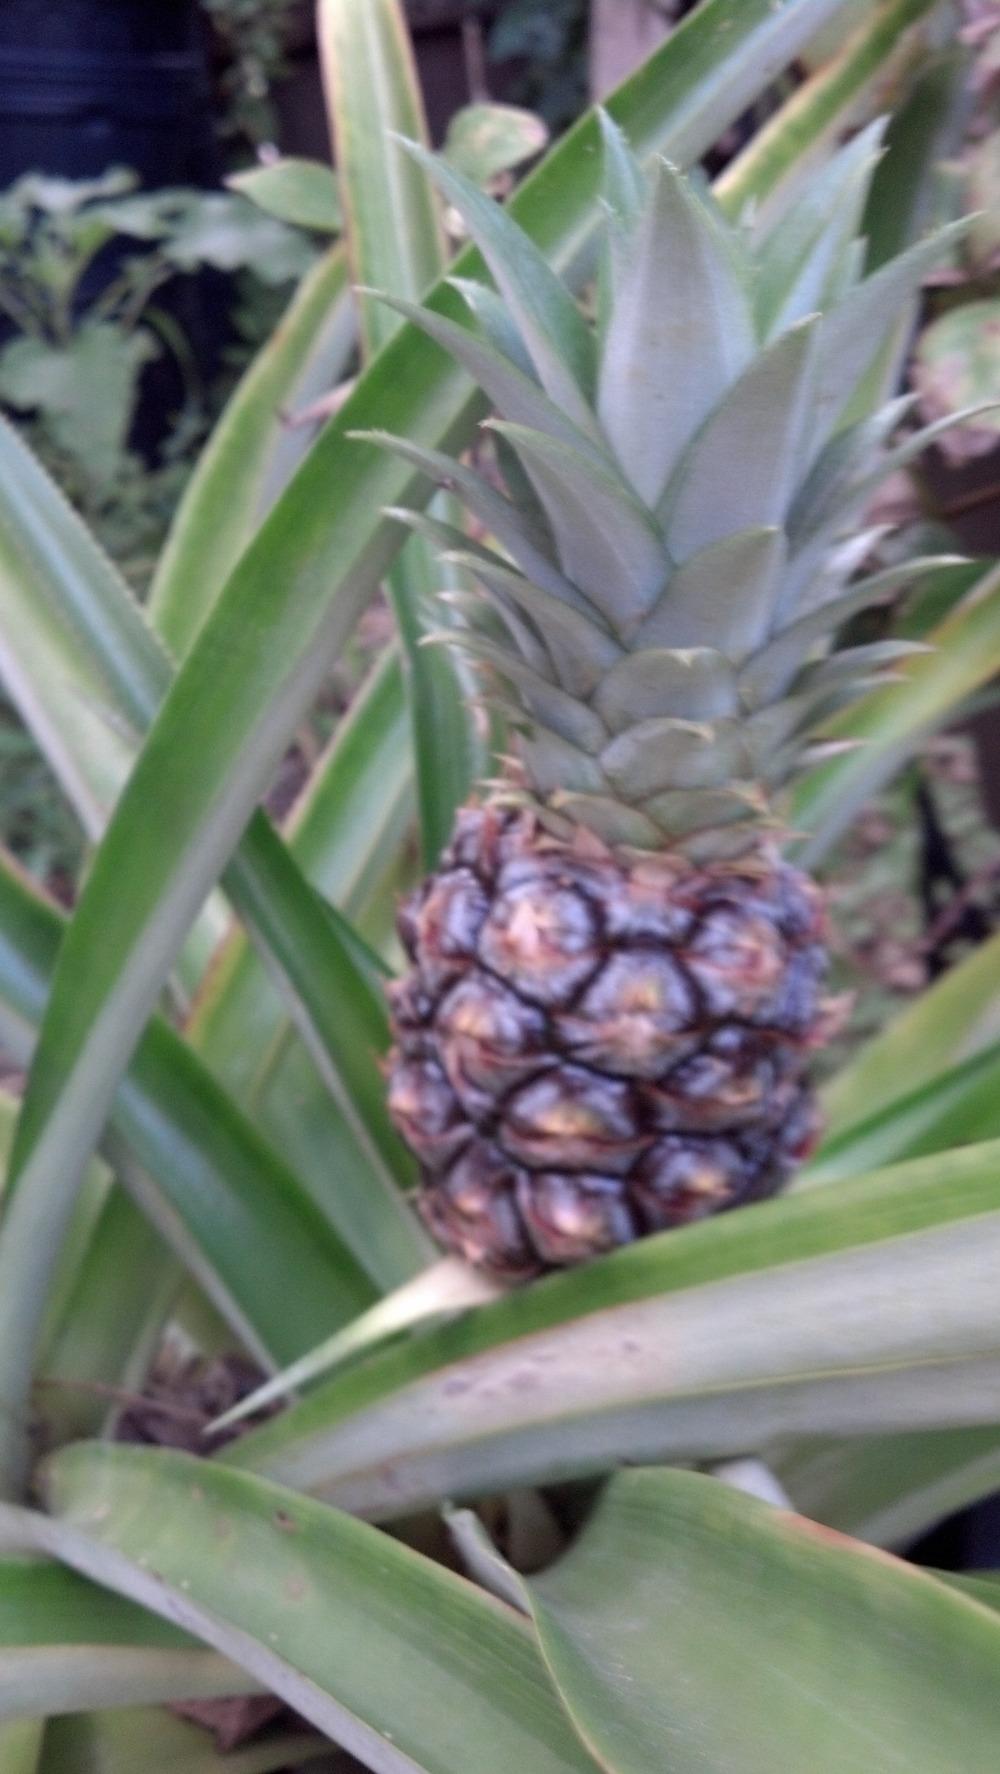 Photo of Pineapple (Ananas comosus) uploaded by lisam0313